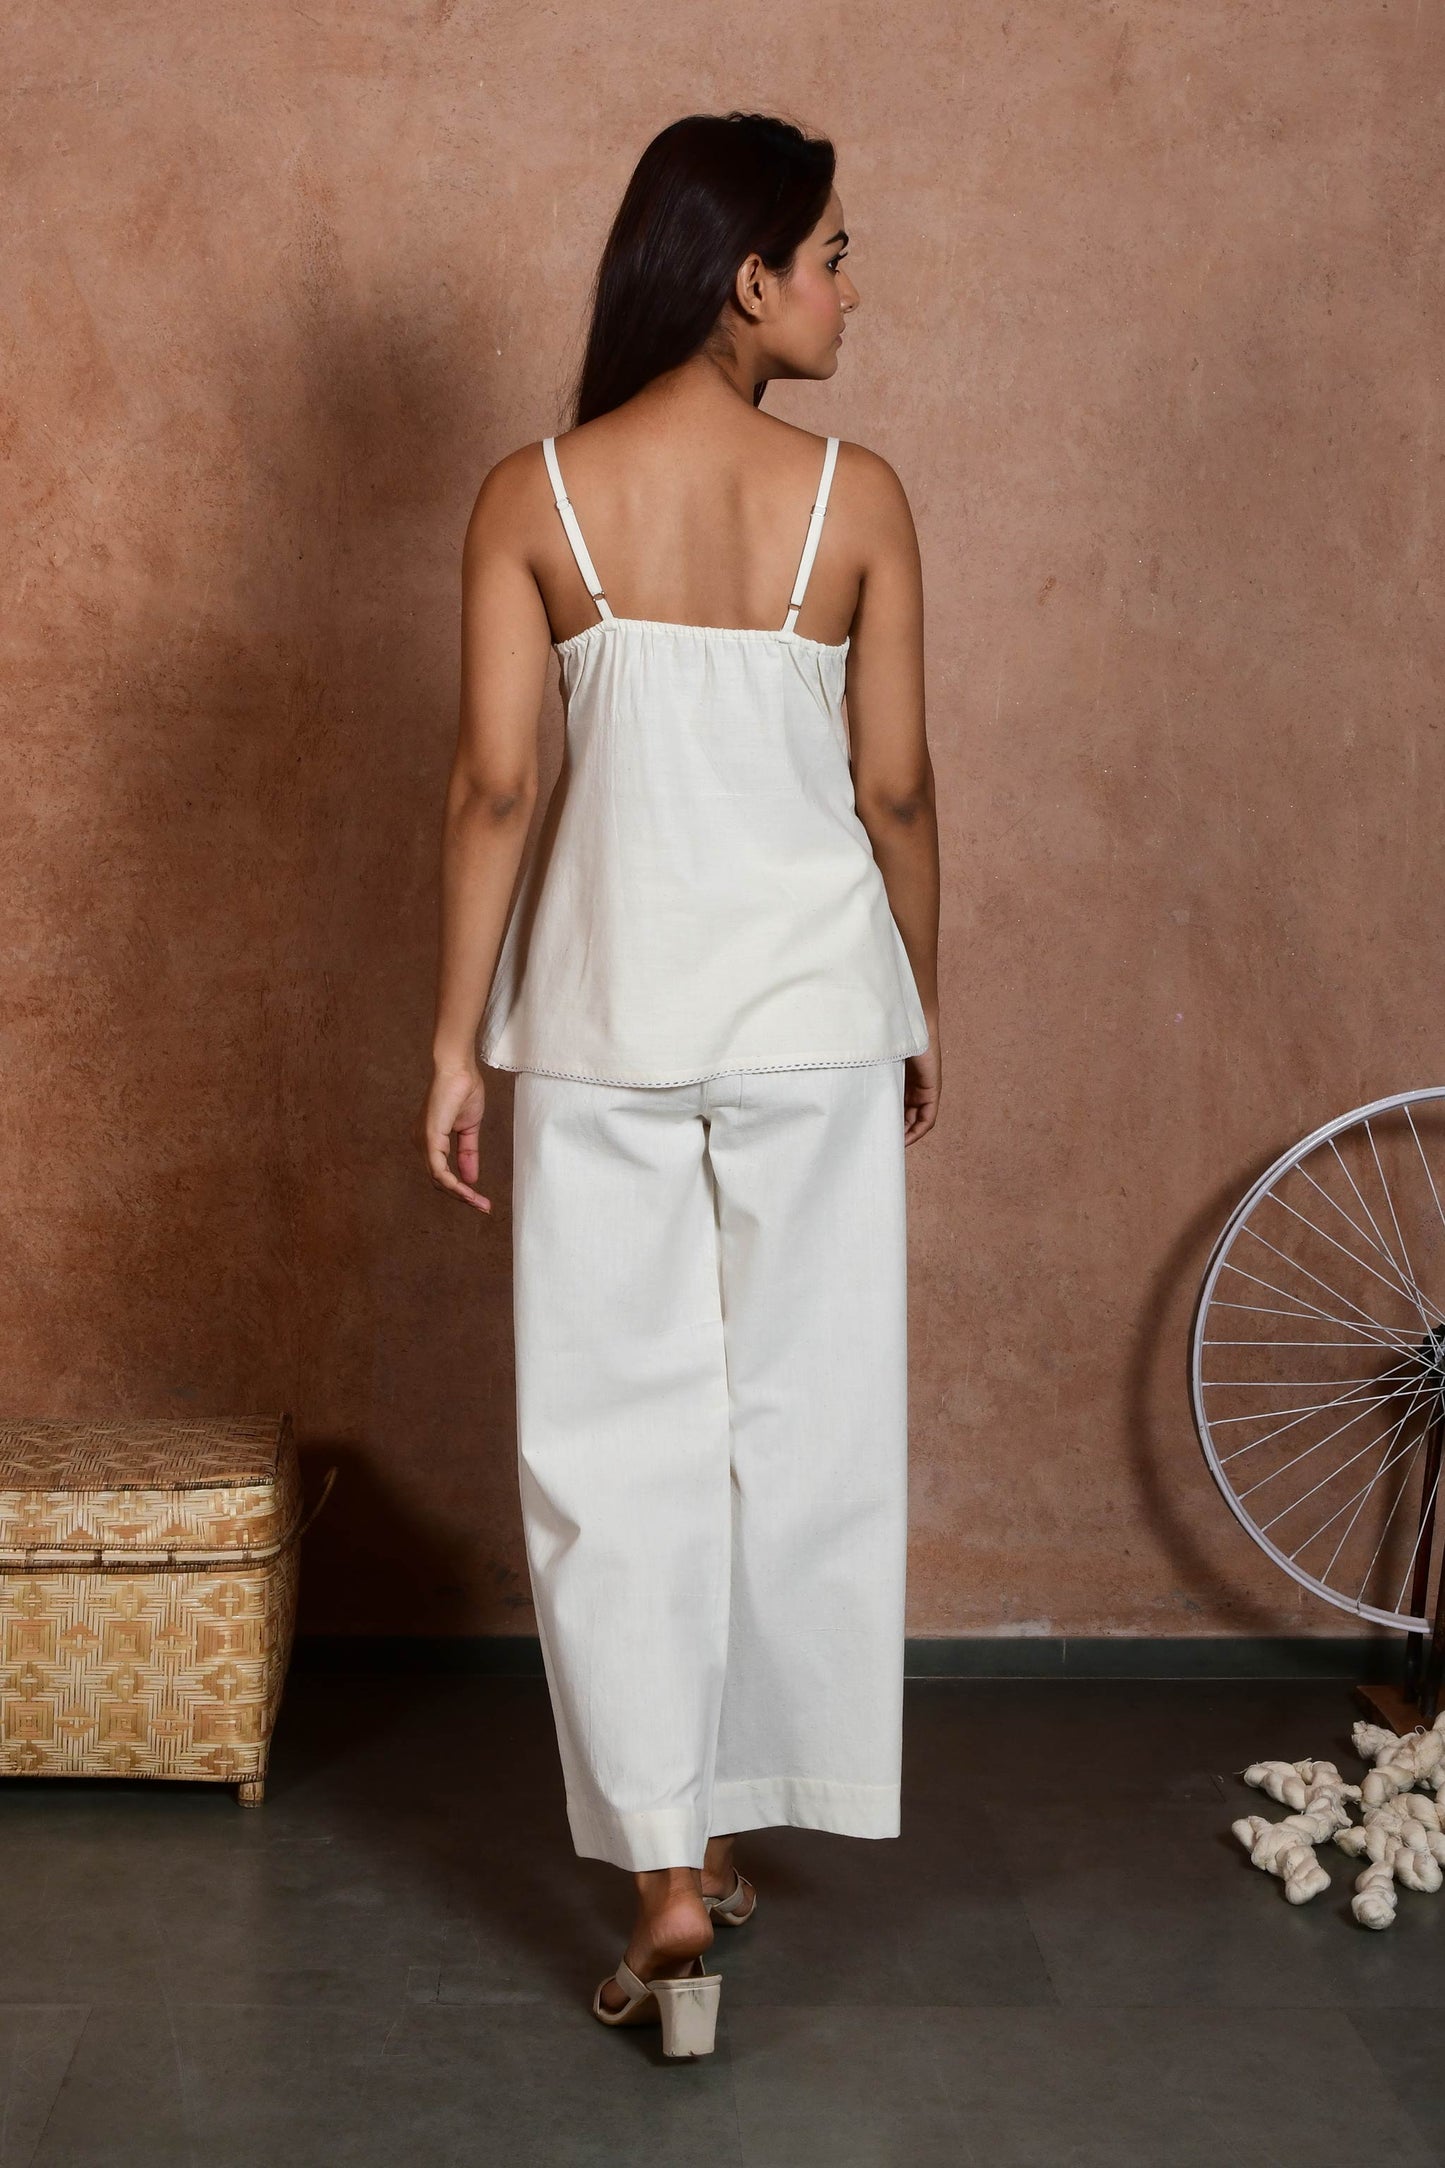 Back pose of an indian model wearing an off white spaghetti top with pin tucks paired with off white straight pants.